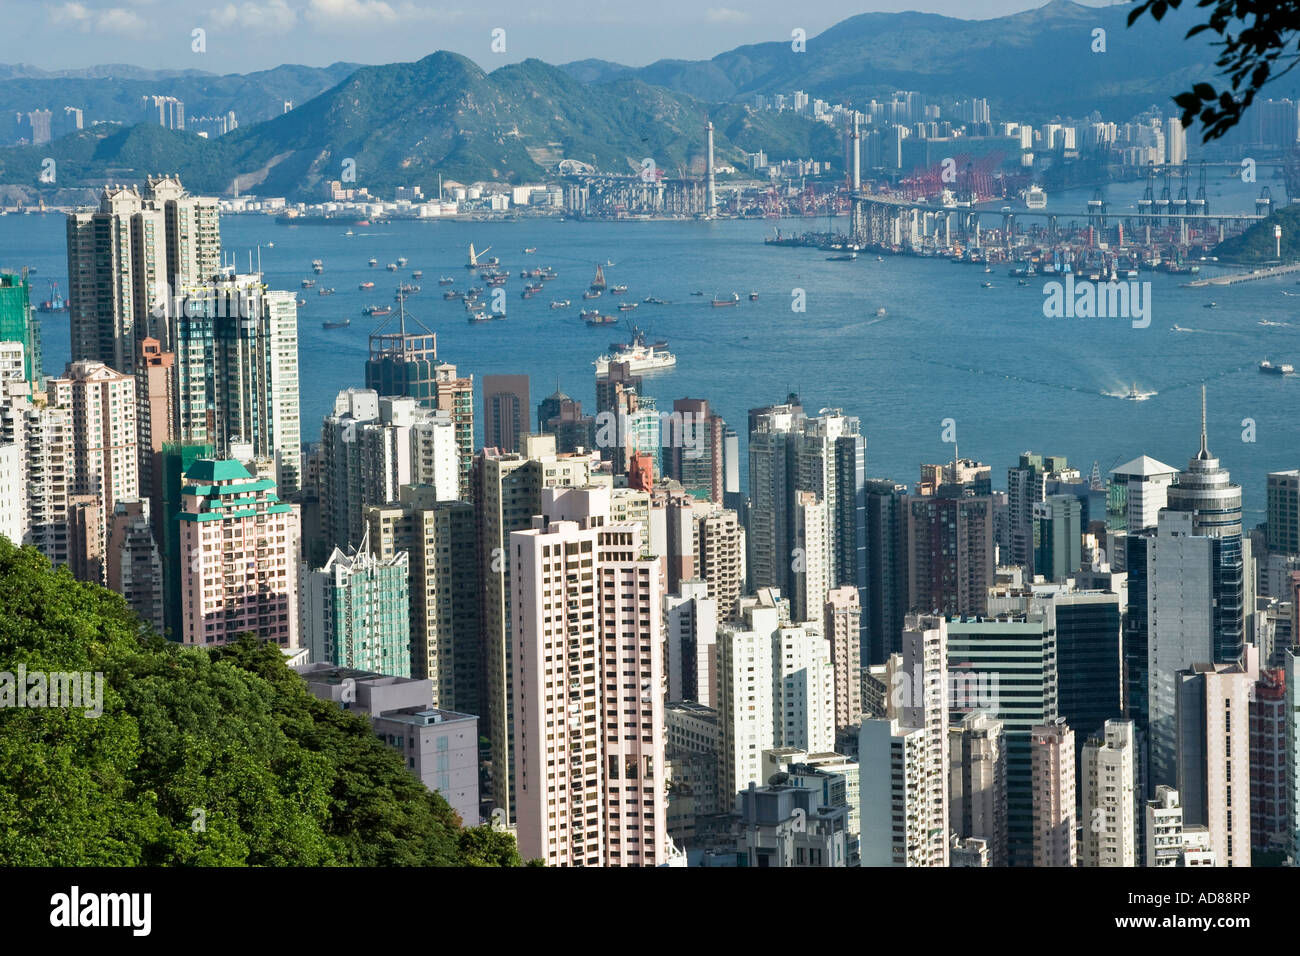 Hong Kong Residential Apartment Buildings and Victoria Harbour Commercial Shipping Docks Stock Photo